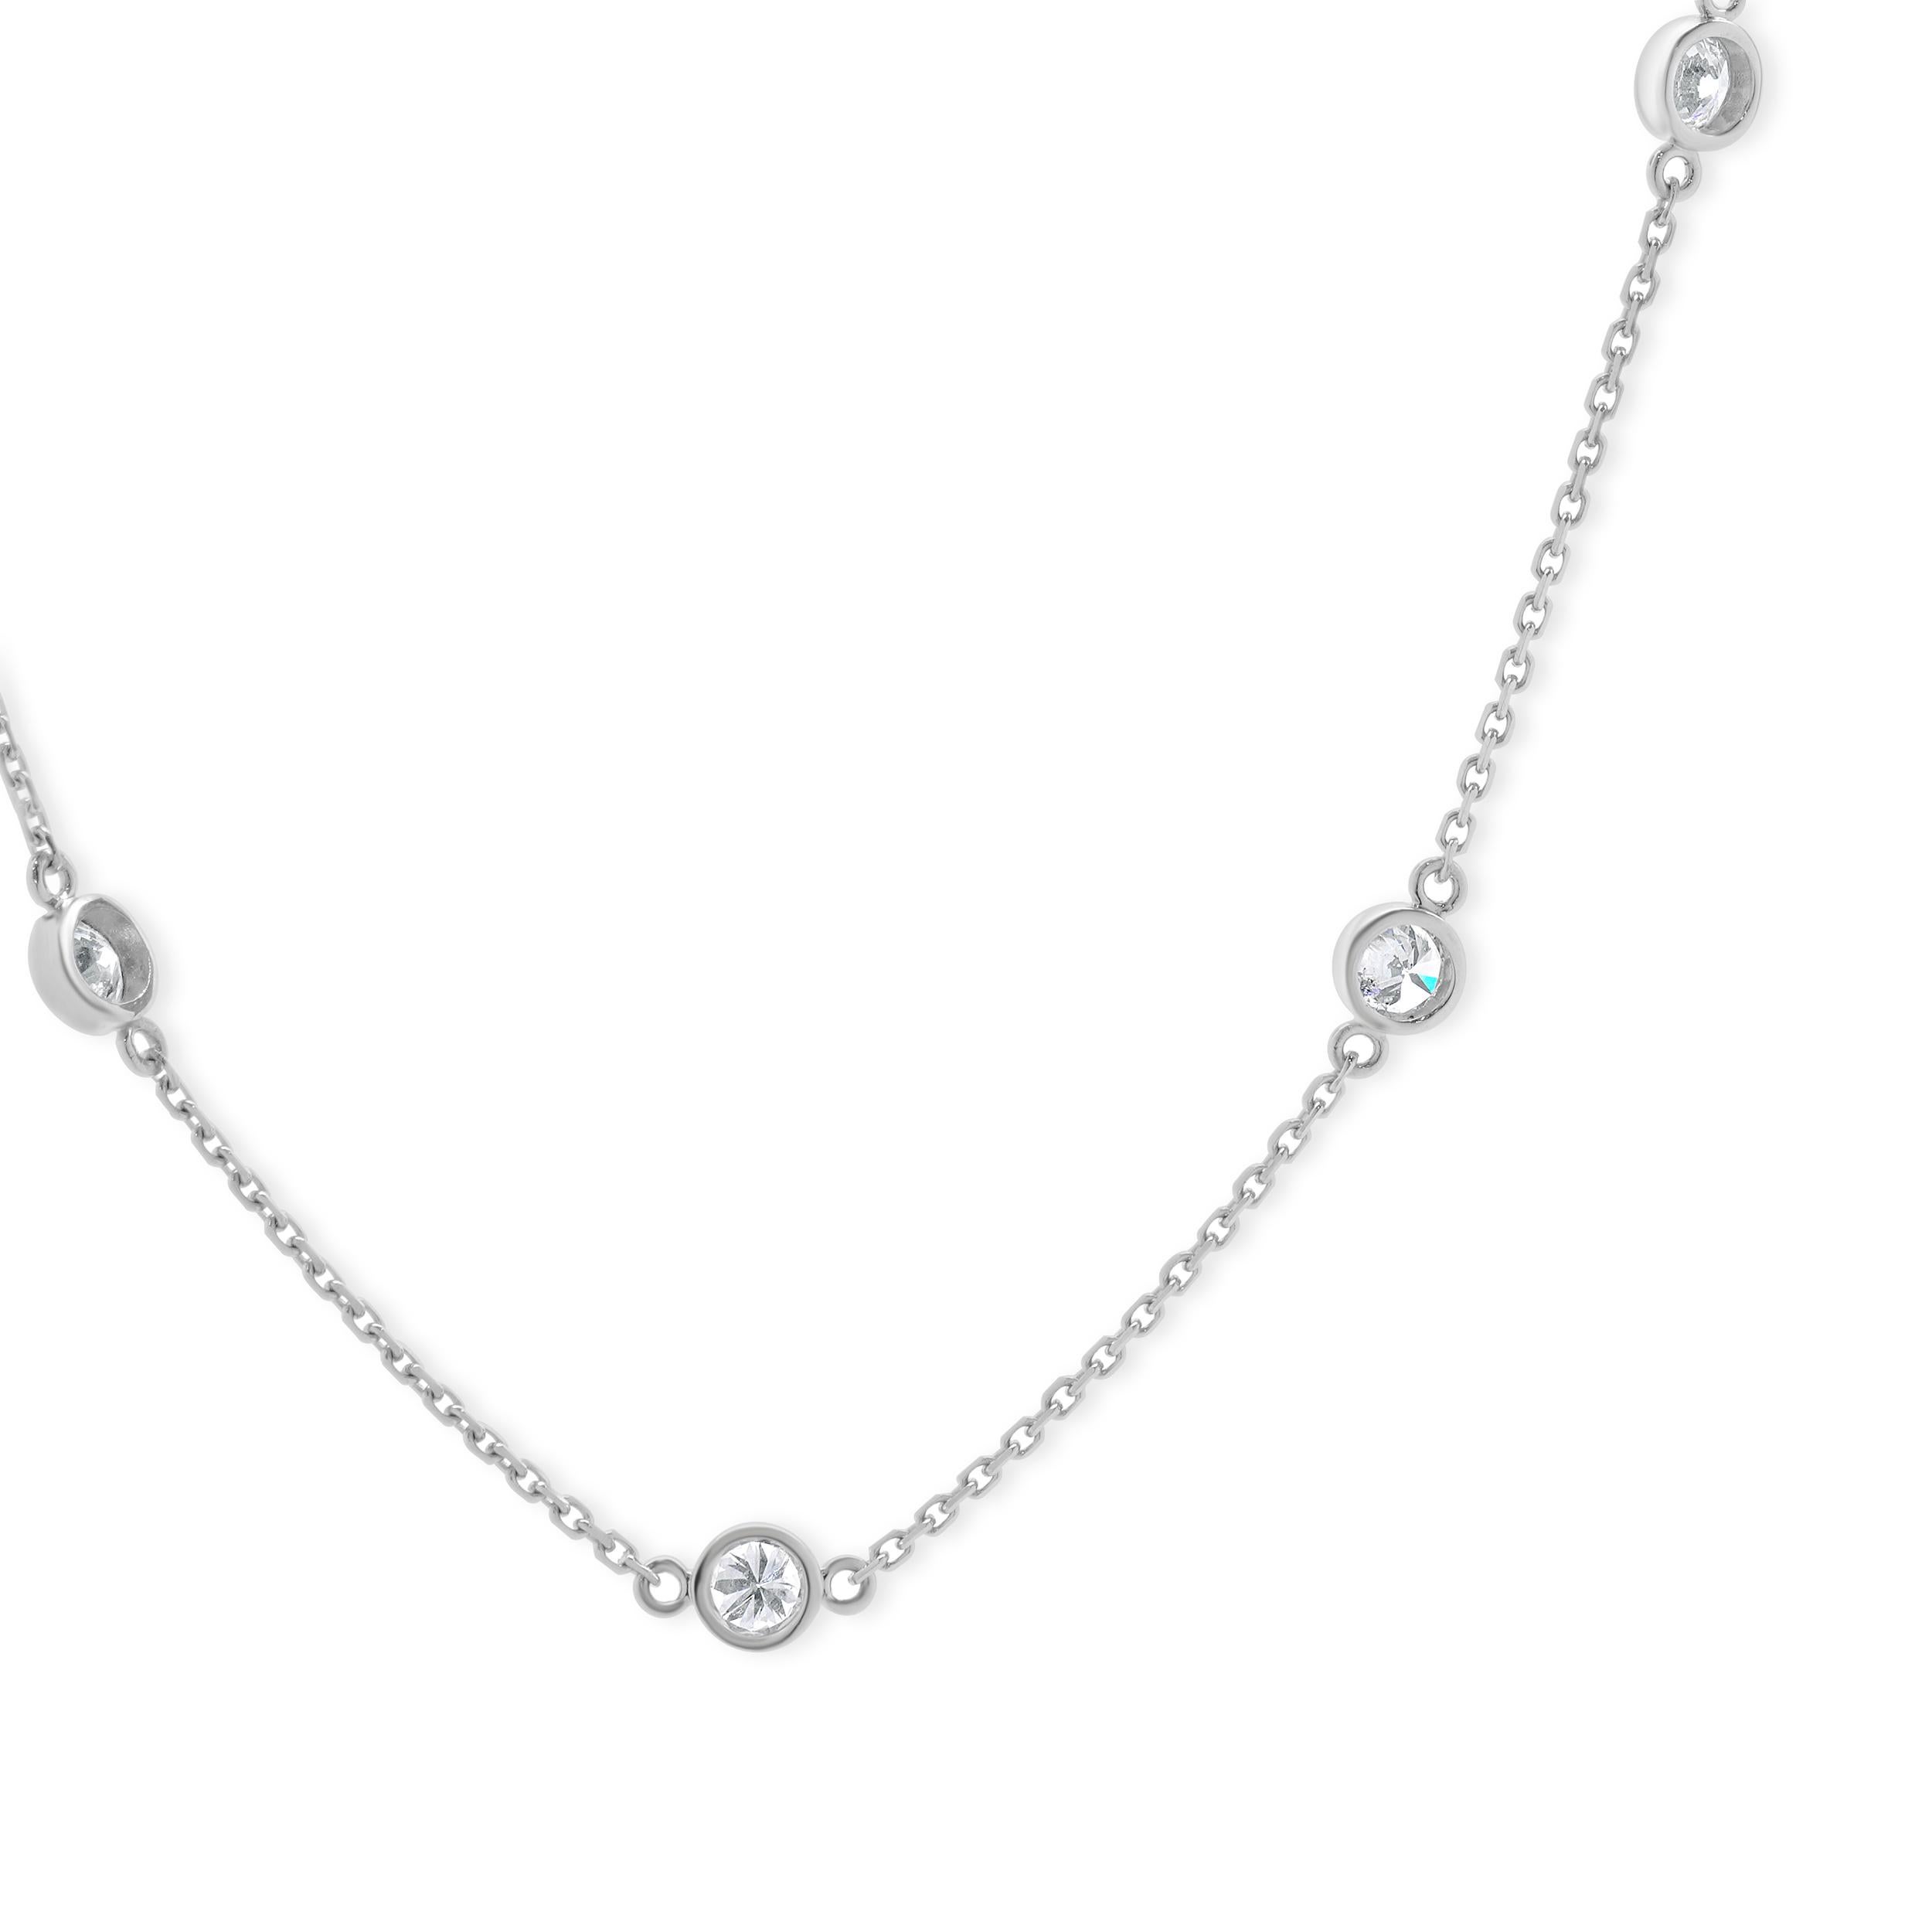 Designer: custom
Material: 14K white gold
Diamonds: 8 round brilliant Diamonds= 1.20cttw
Color: G-H
Clarity:VS-SI1
Dimensions: necklace measures 18-inches in length 
Weight: 3.72 grams
